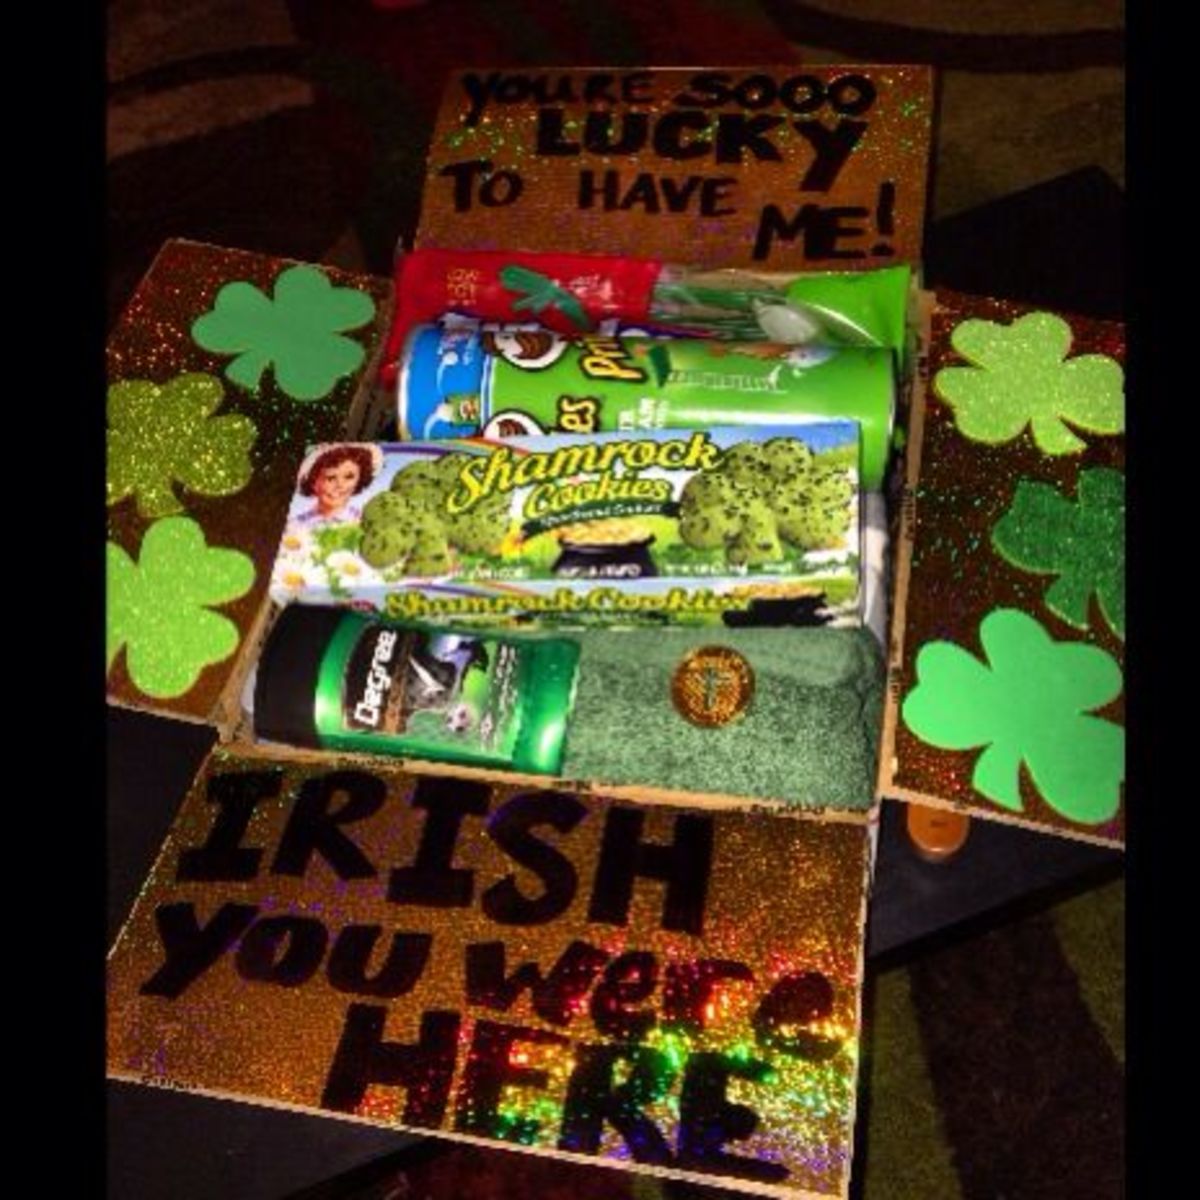 st-patricks-day-care-package-ideas